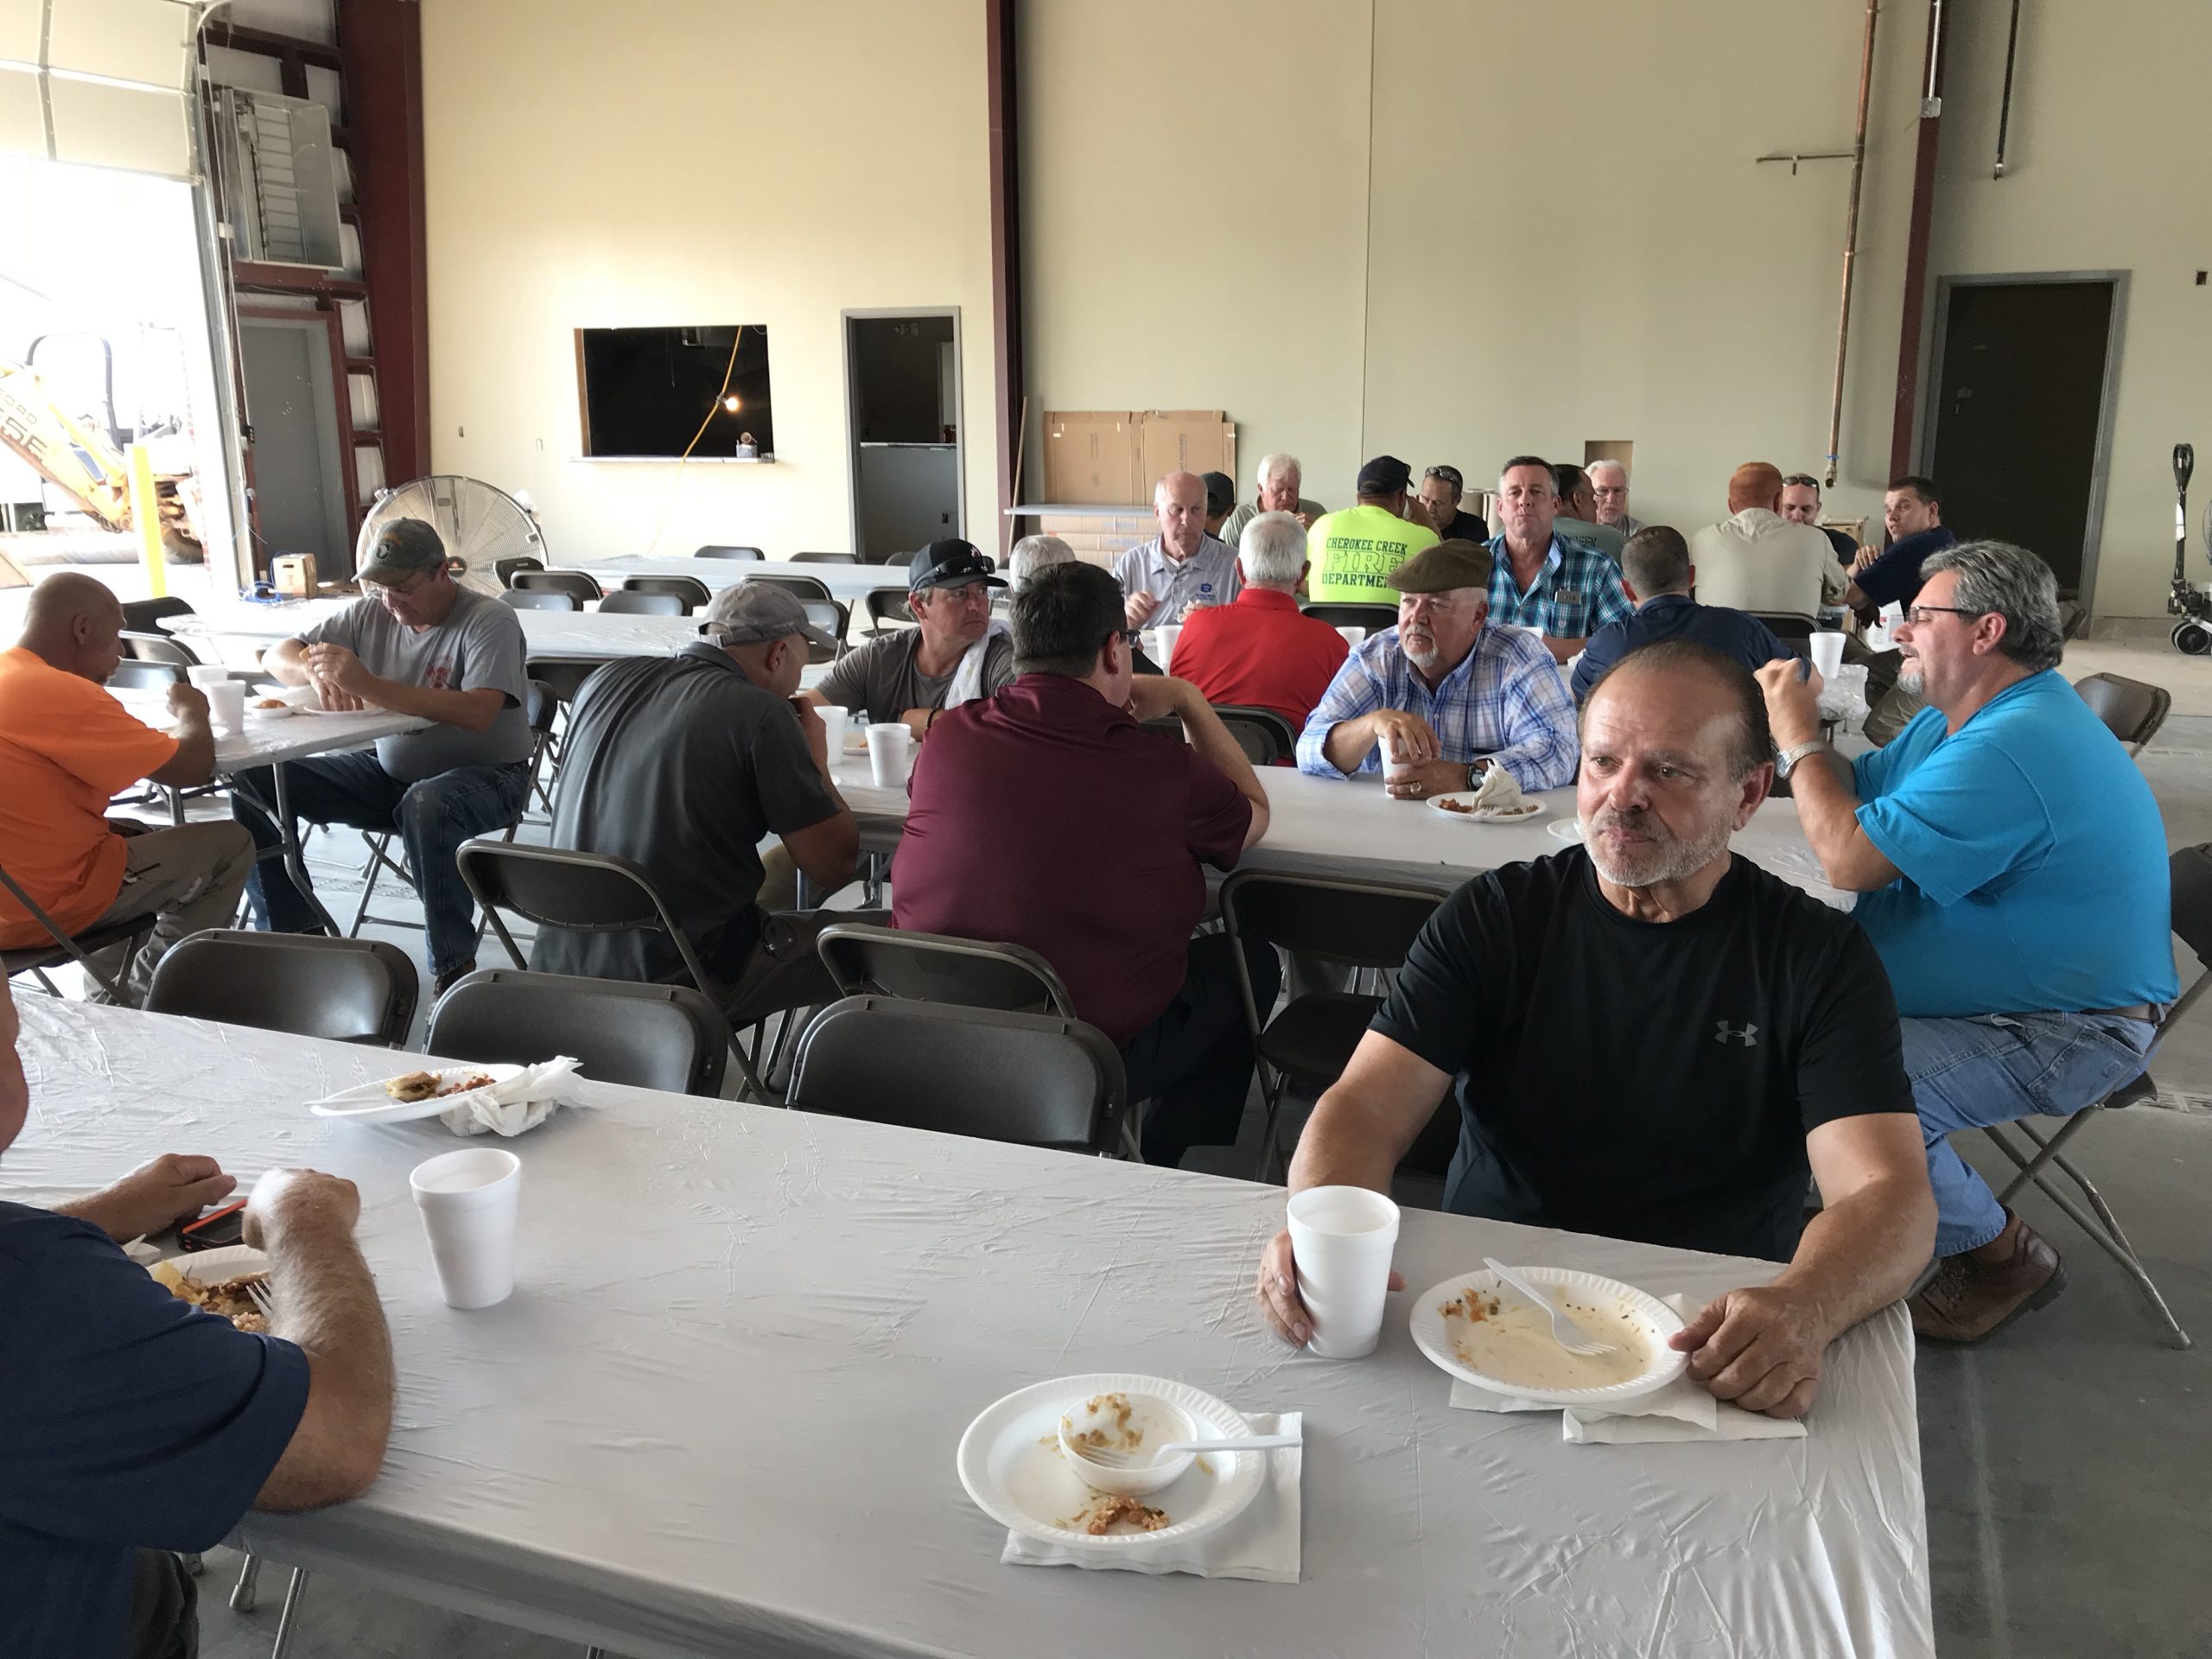 Featured image for “Dinner Appreciation at the new fire station”